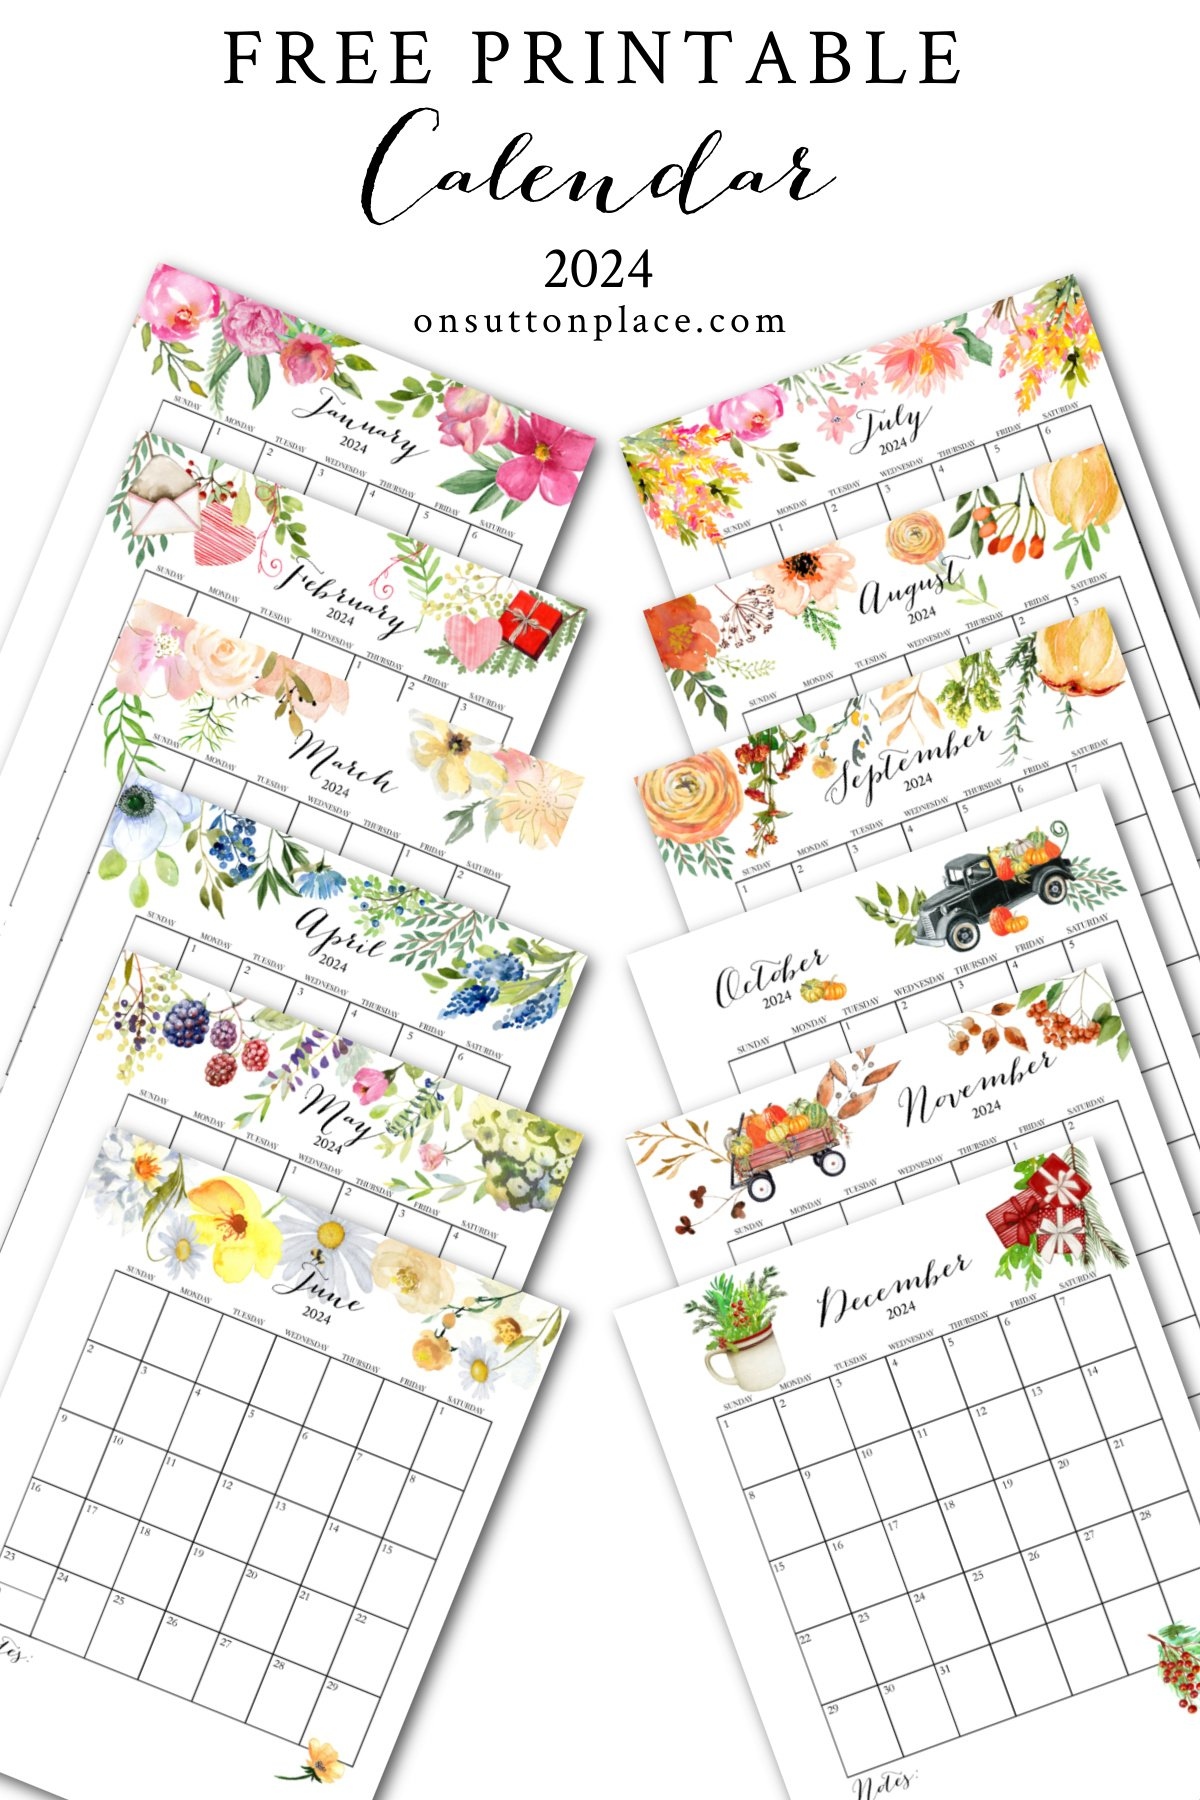 2024 Free Printable Calendar With Planner Pages - On Sutton Place inside Free Printable Calendar 2024 Planner